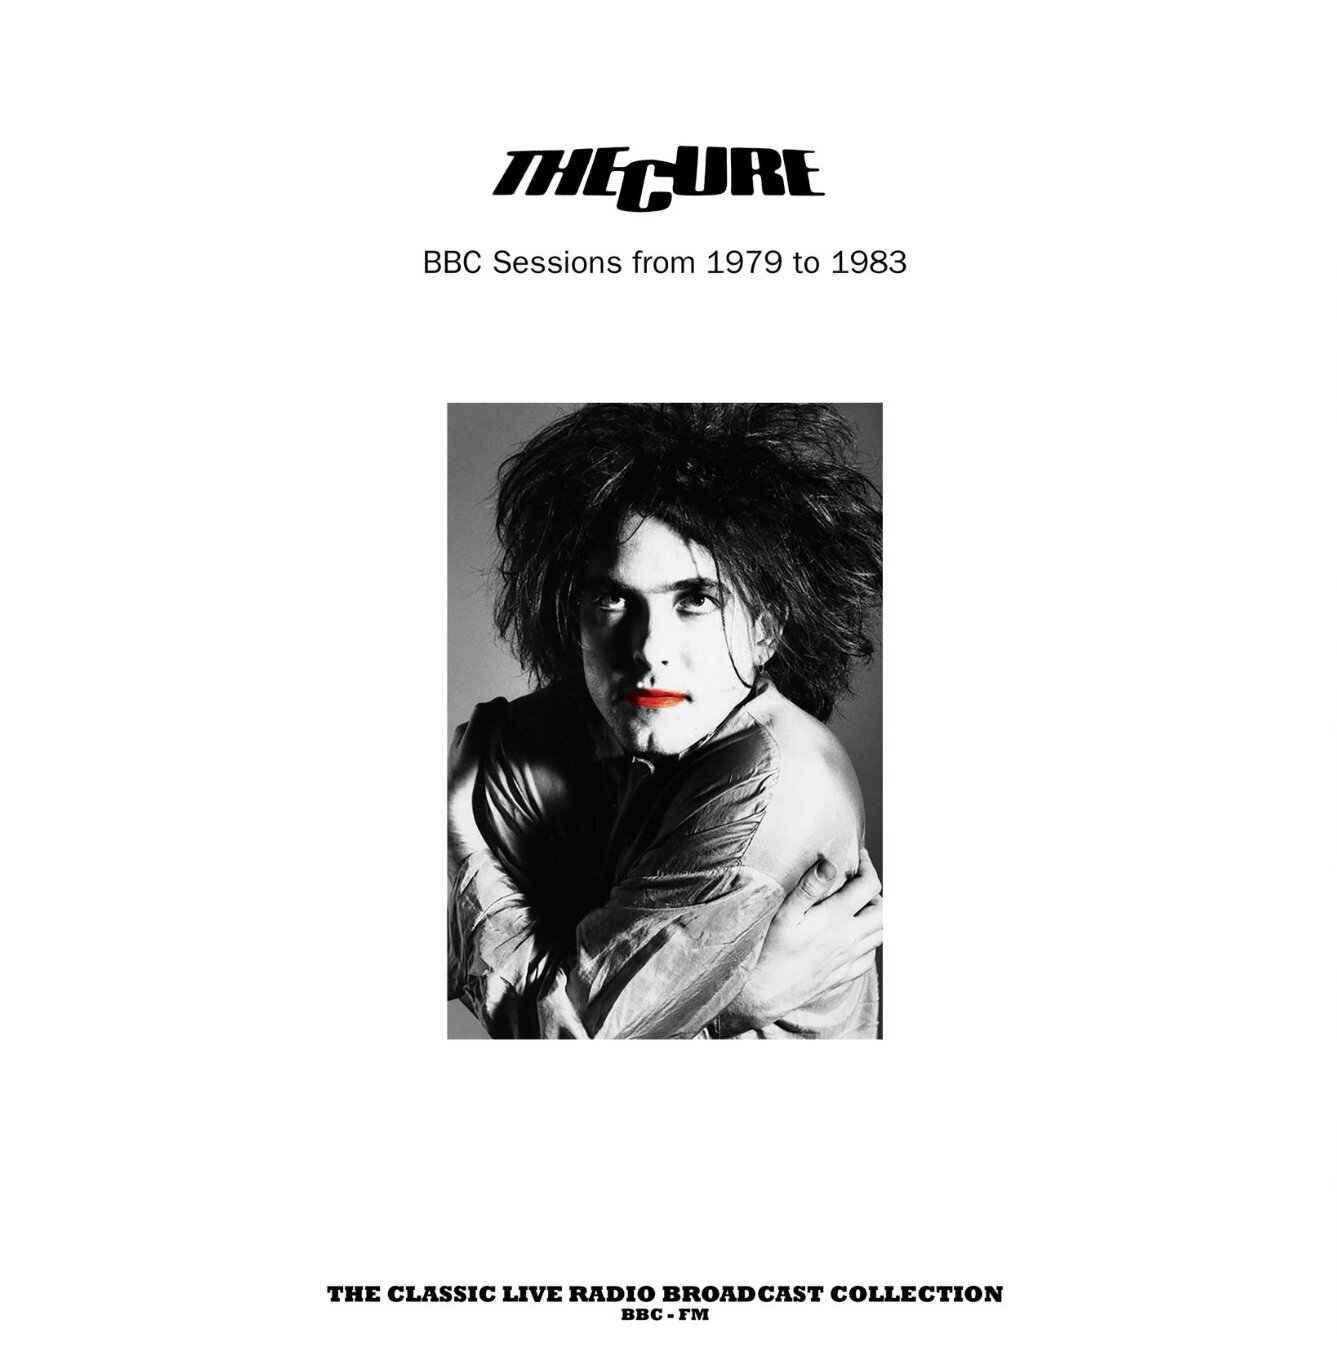 Schallplatte The Cure - BBC Sessions 1979-1983 (Red Coloured) (LP)